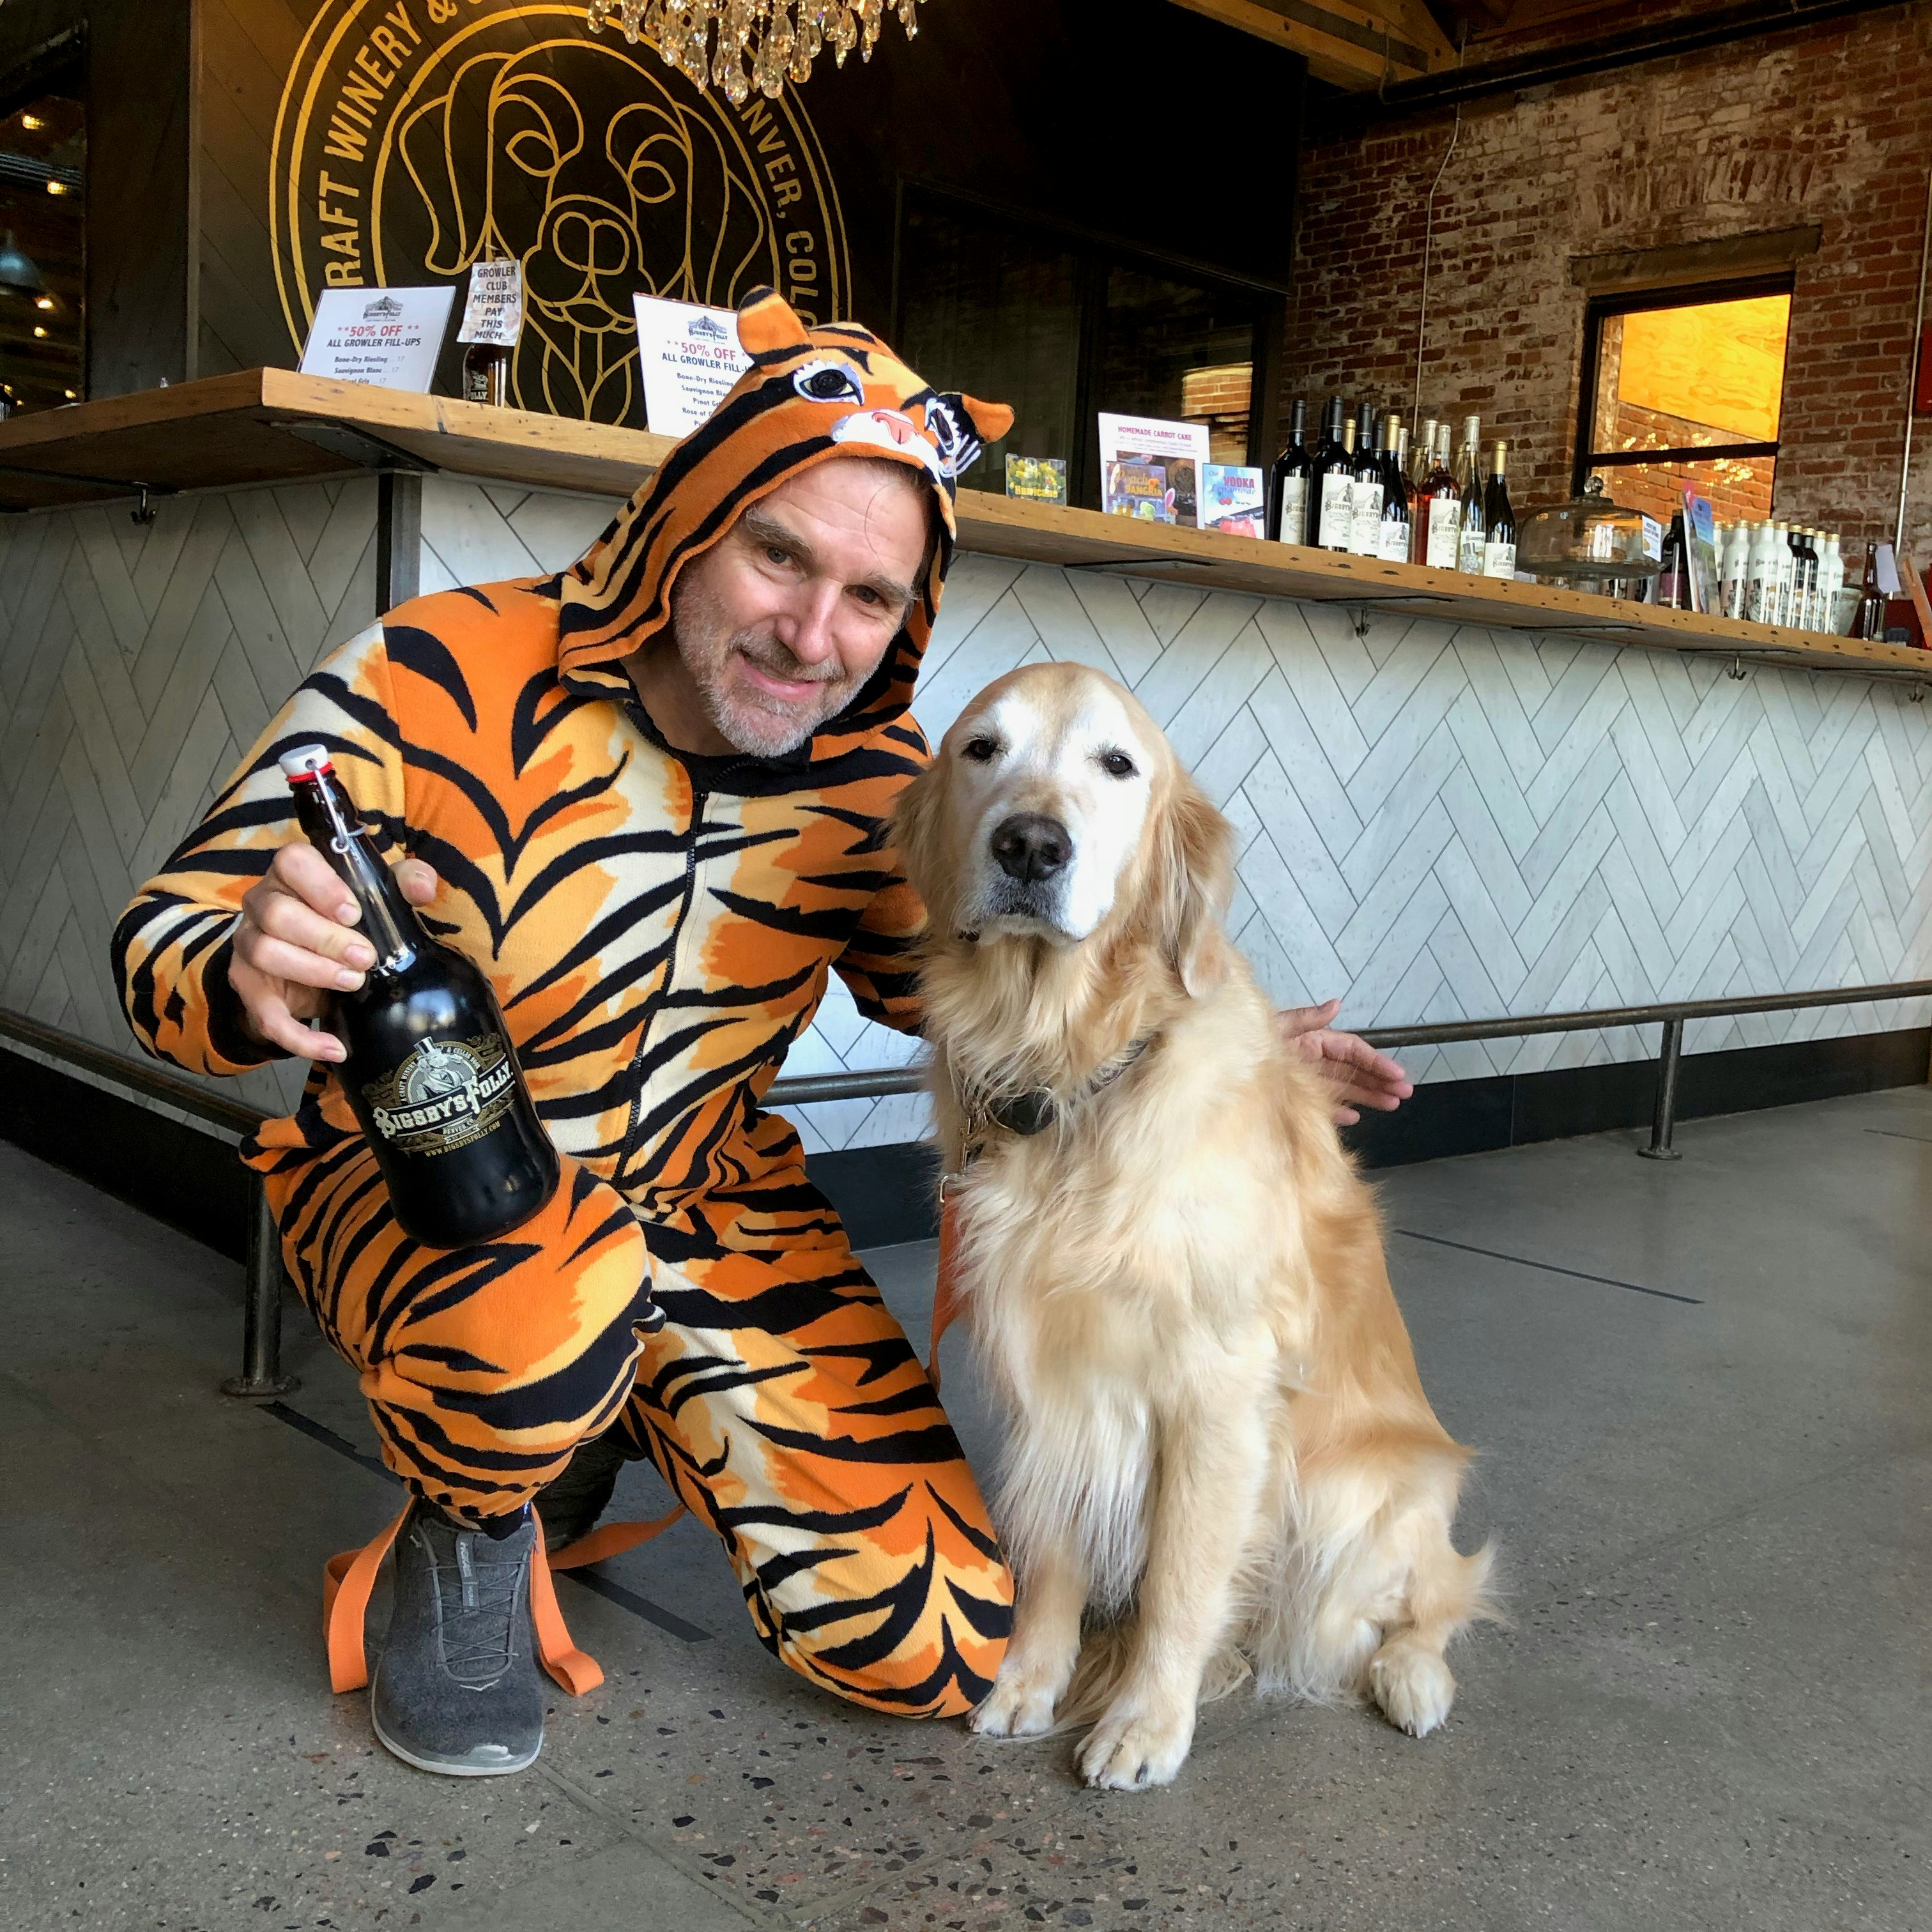 Man dressed in tiger costume crouches with his dog and a growler of wine